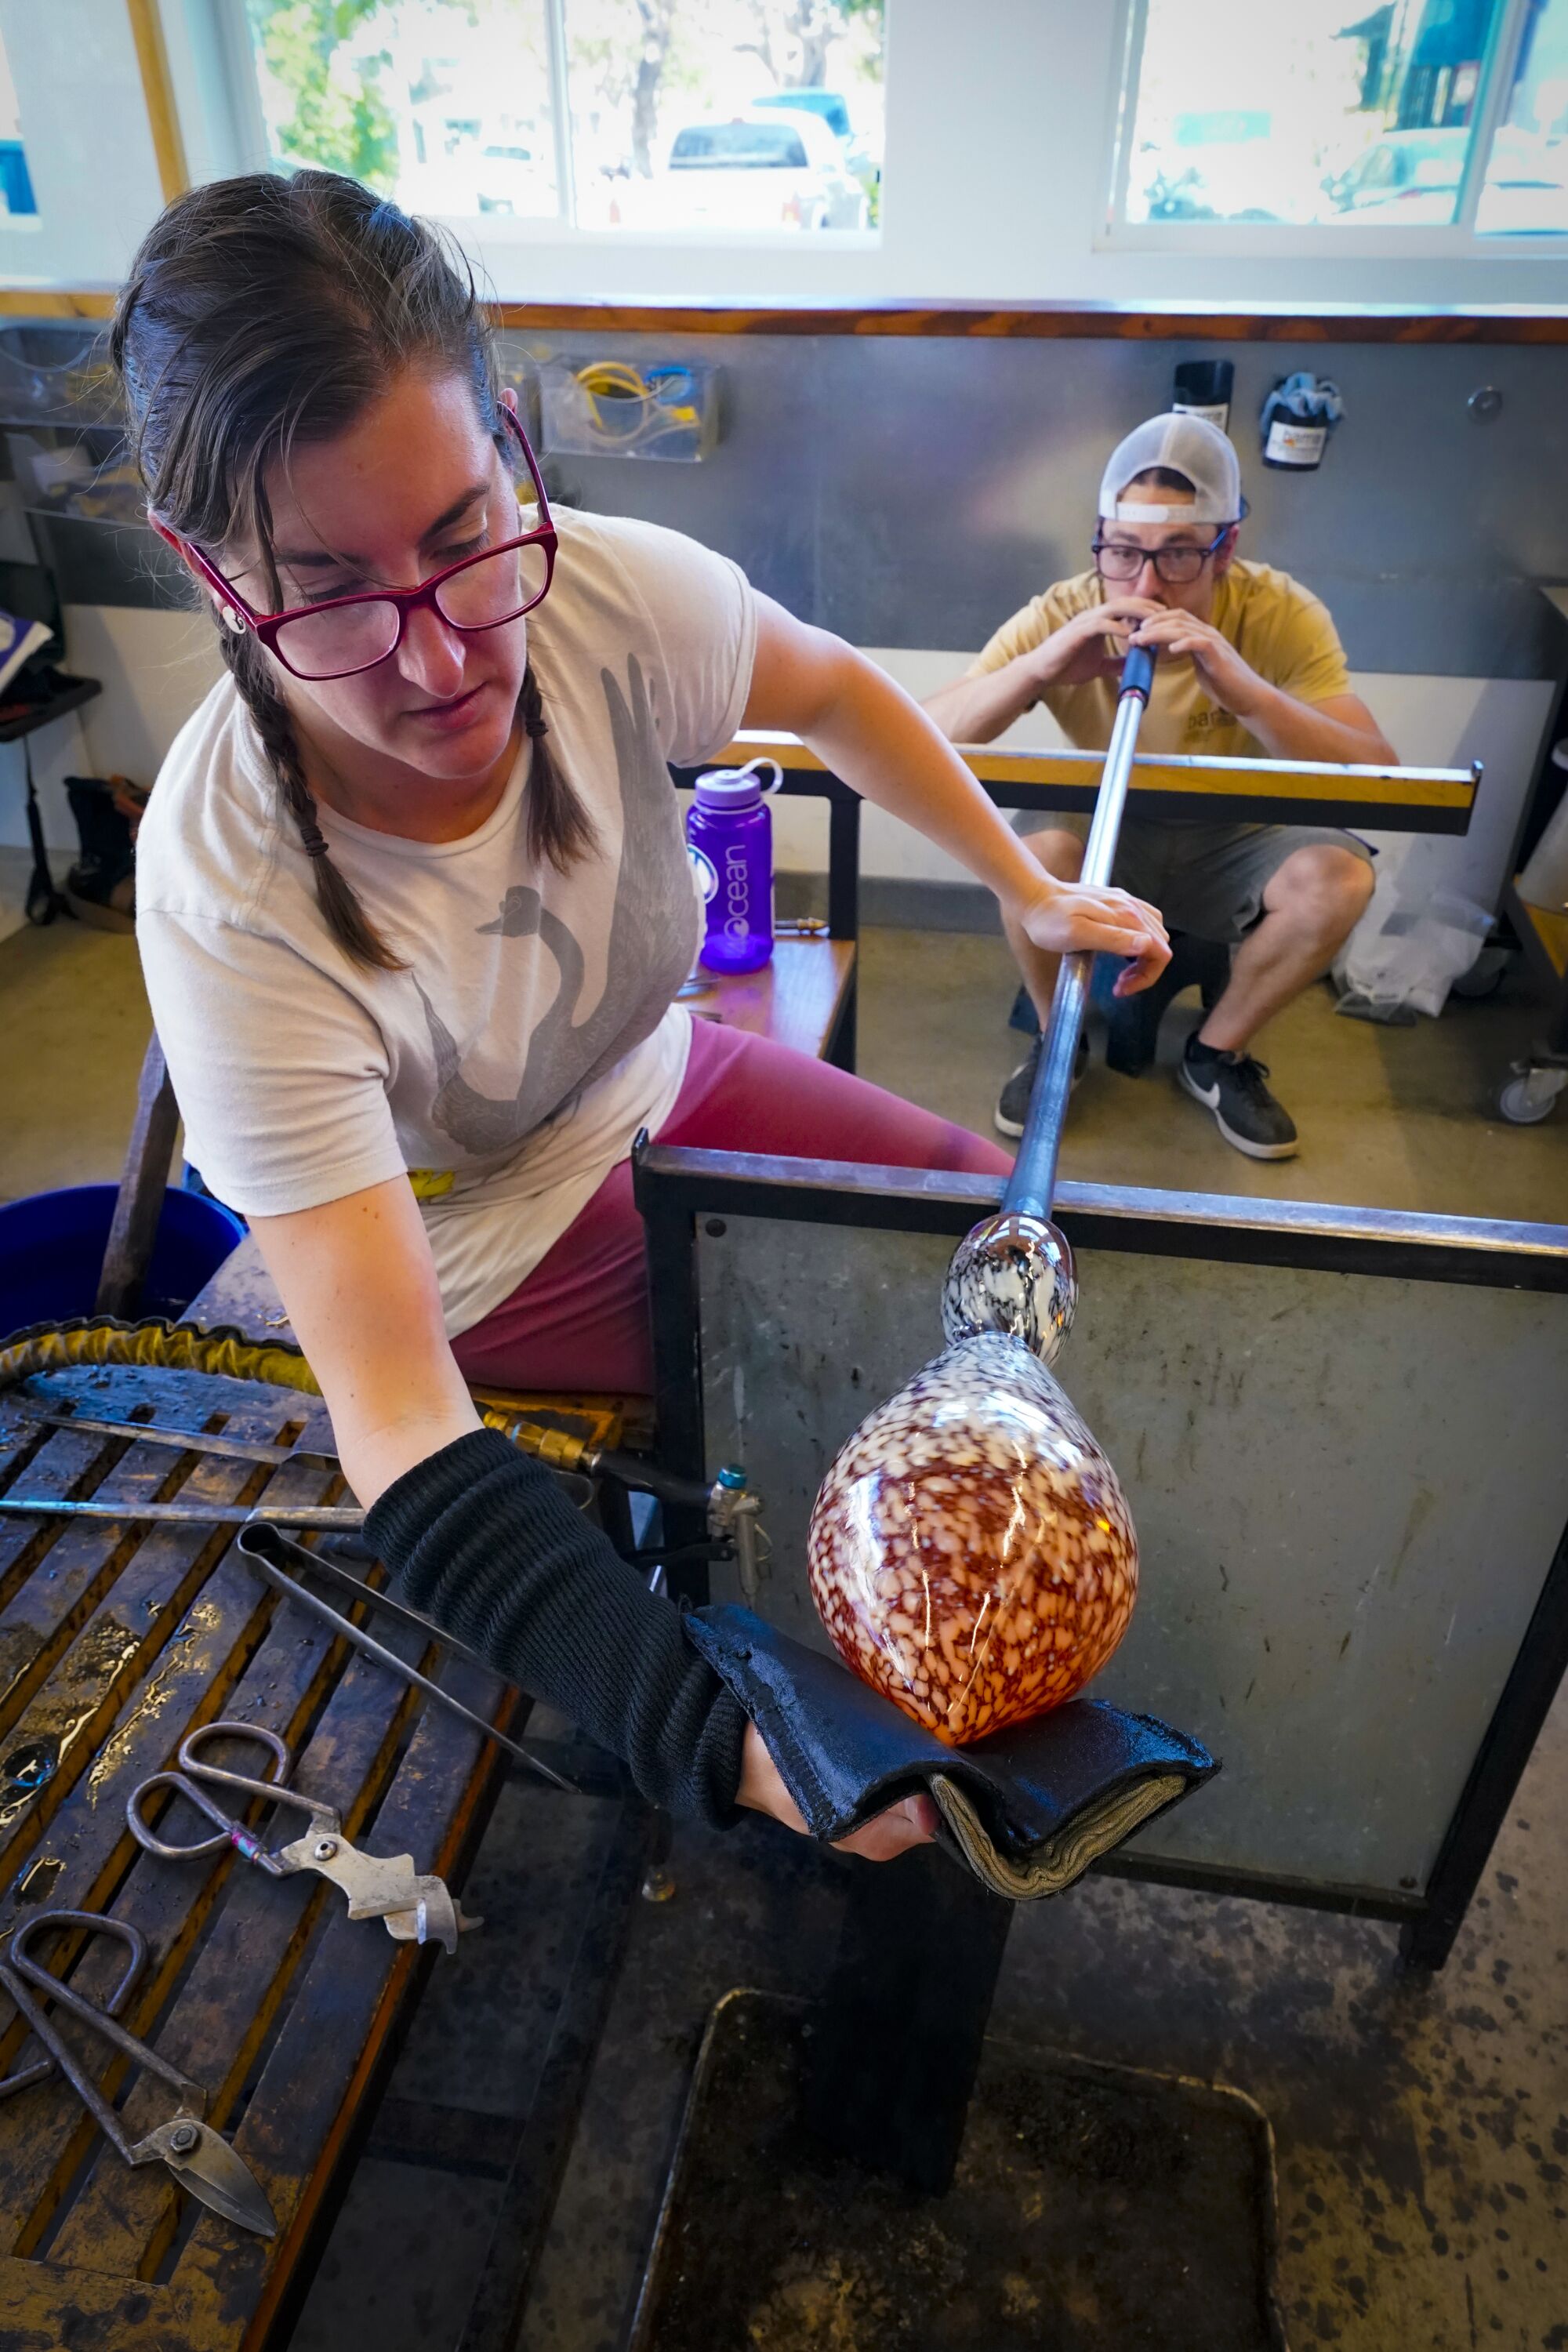 A glass artist works to shape a bowl, helped by an assistant blowing into the glass through a tube.